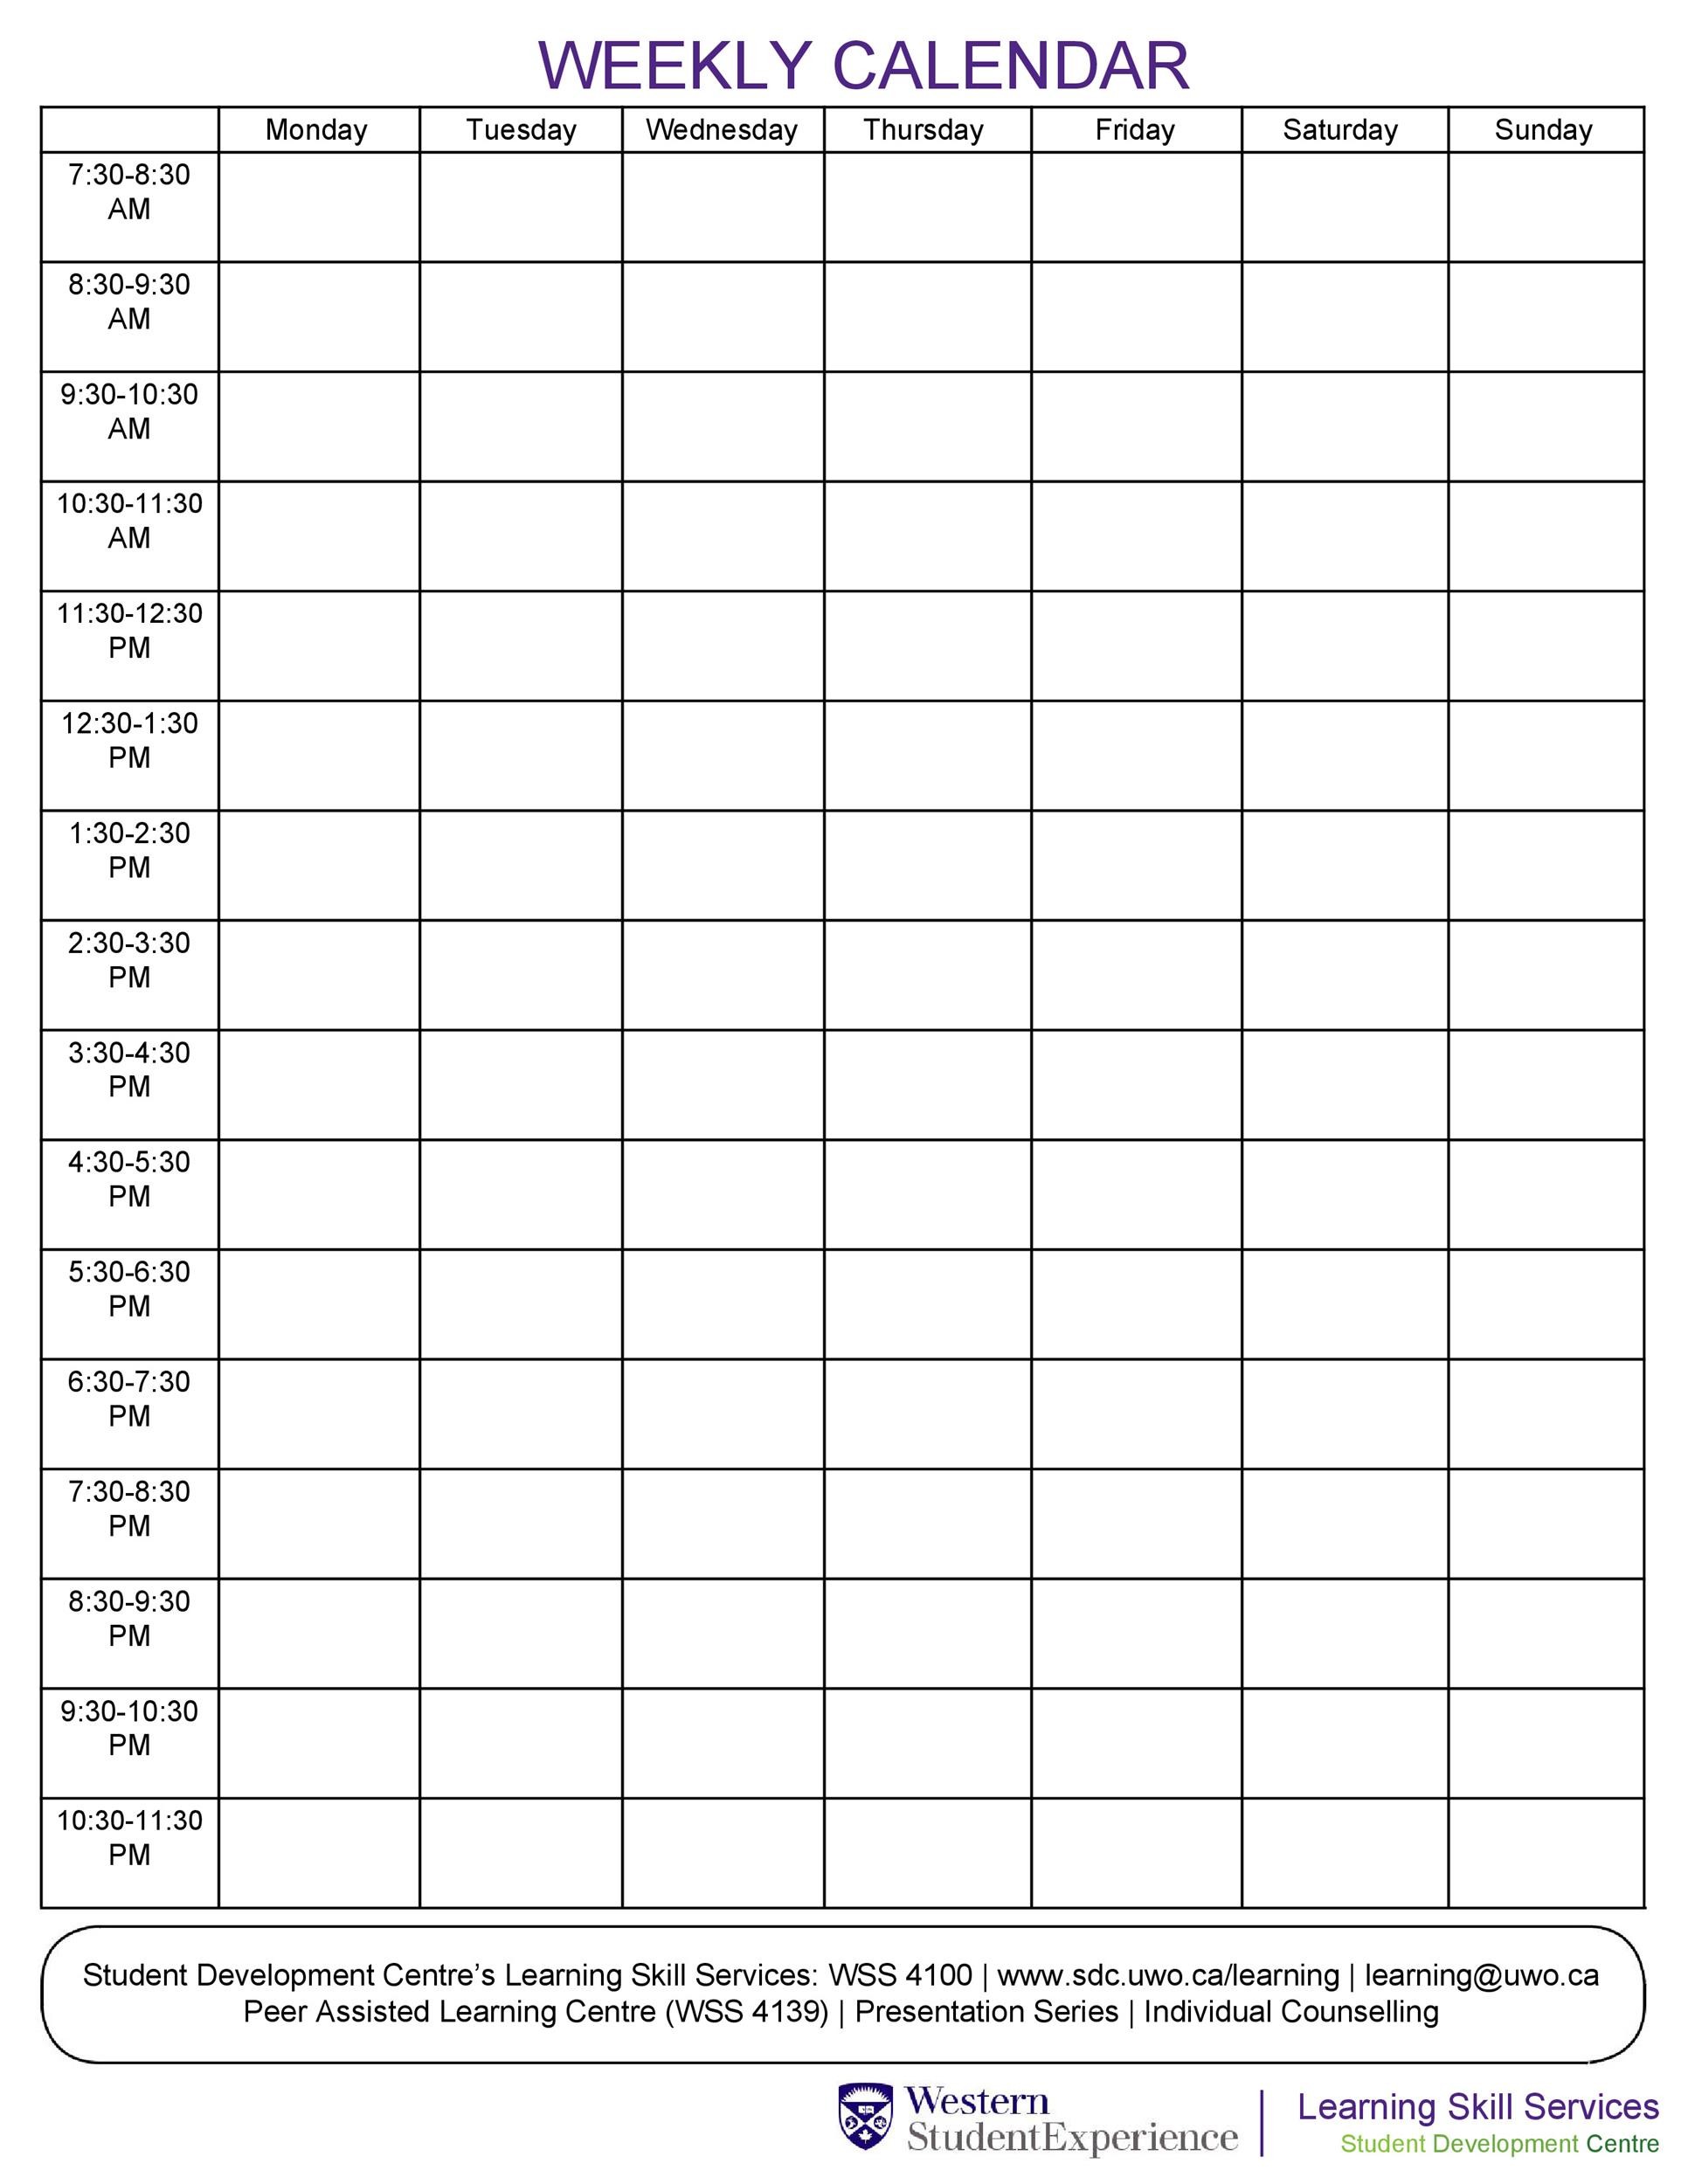 43-effective-hourly-schedule-templates-excel-ms-word-templatelab